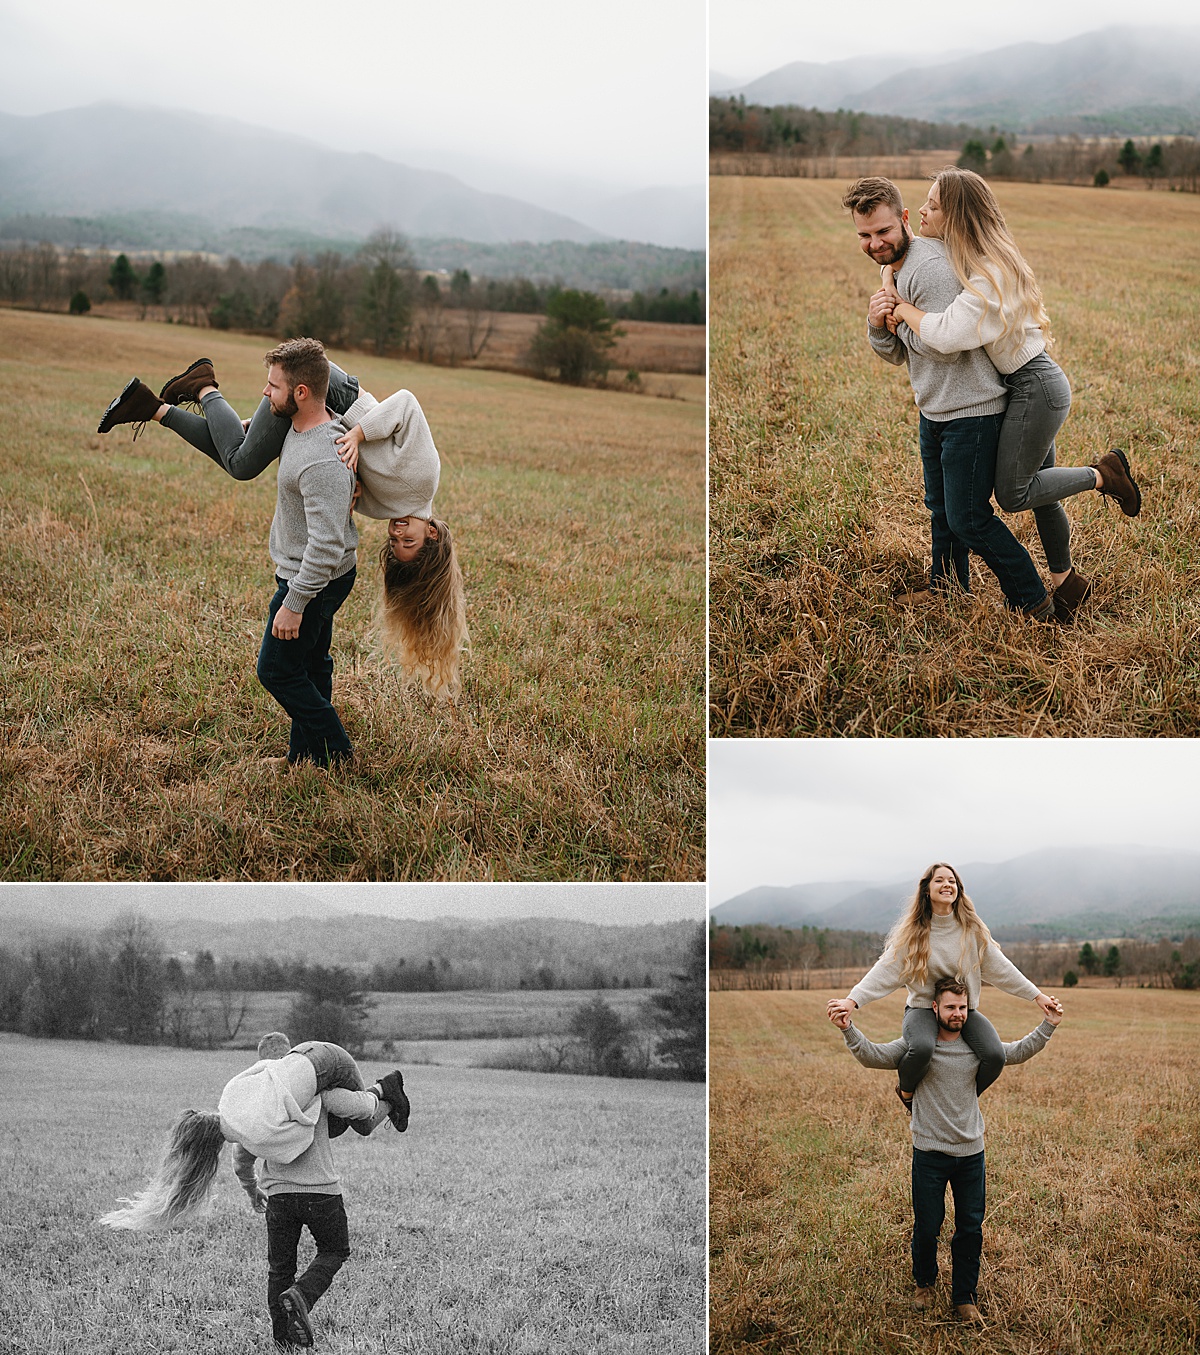 Engagement photo session with the man lifting up the woman over his shoulder in a playful way.